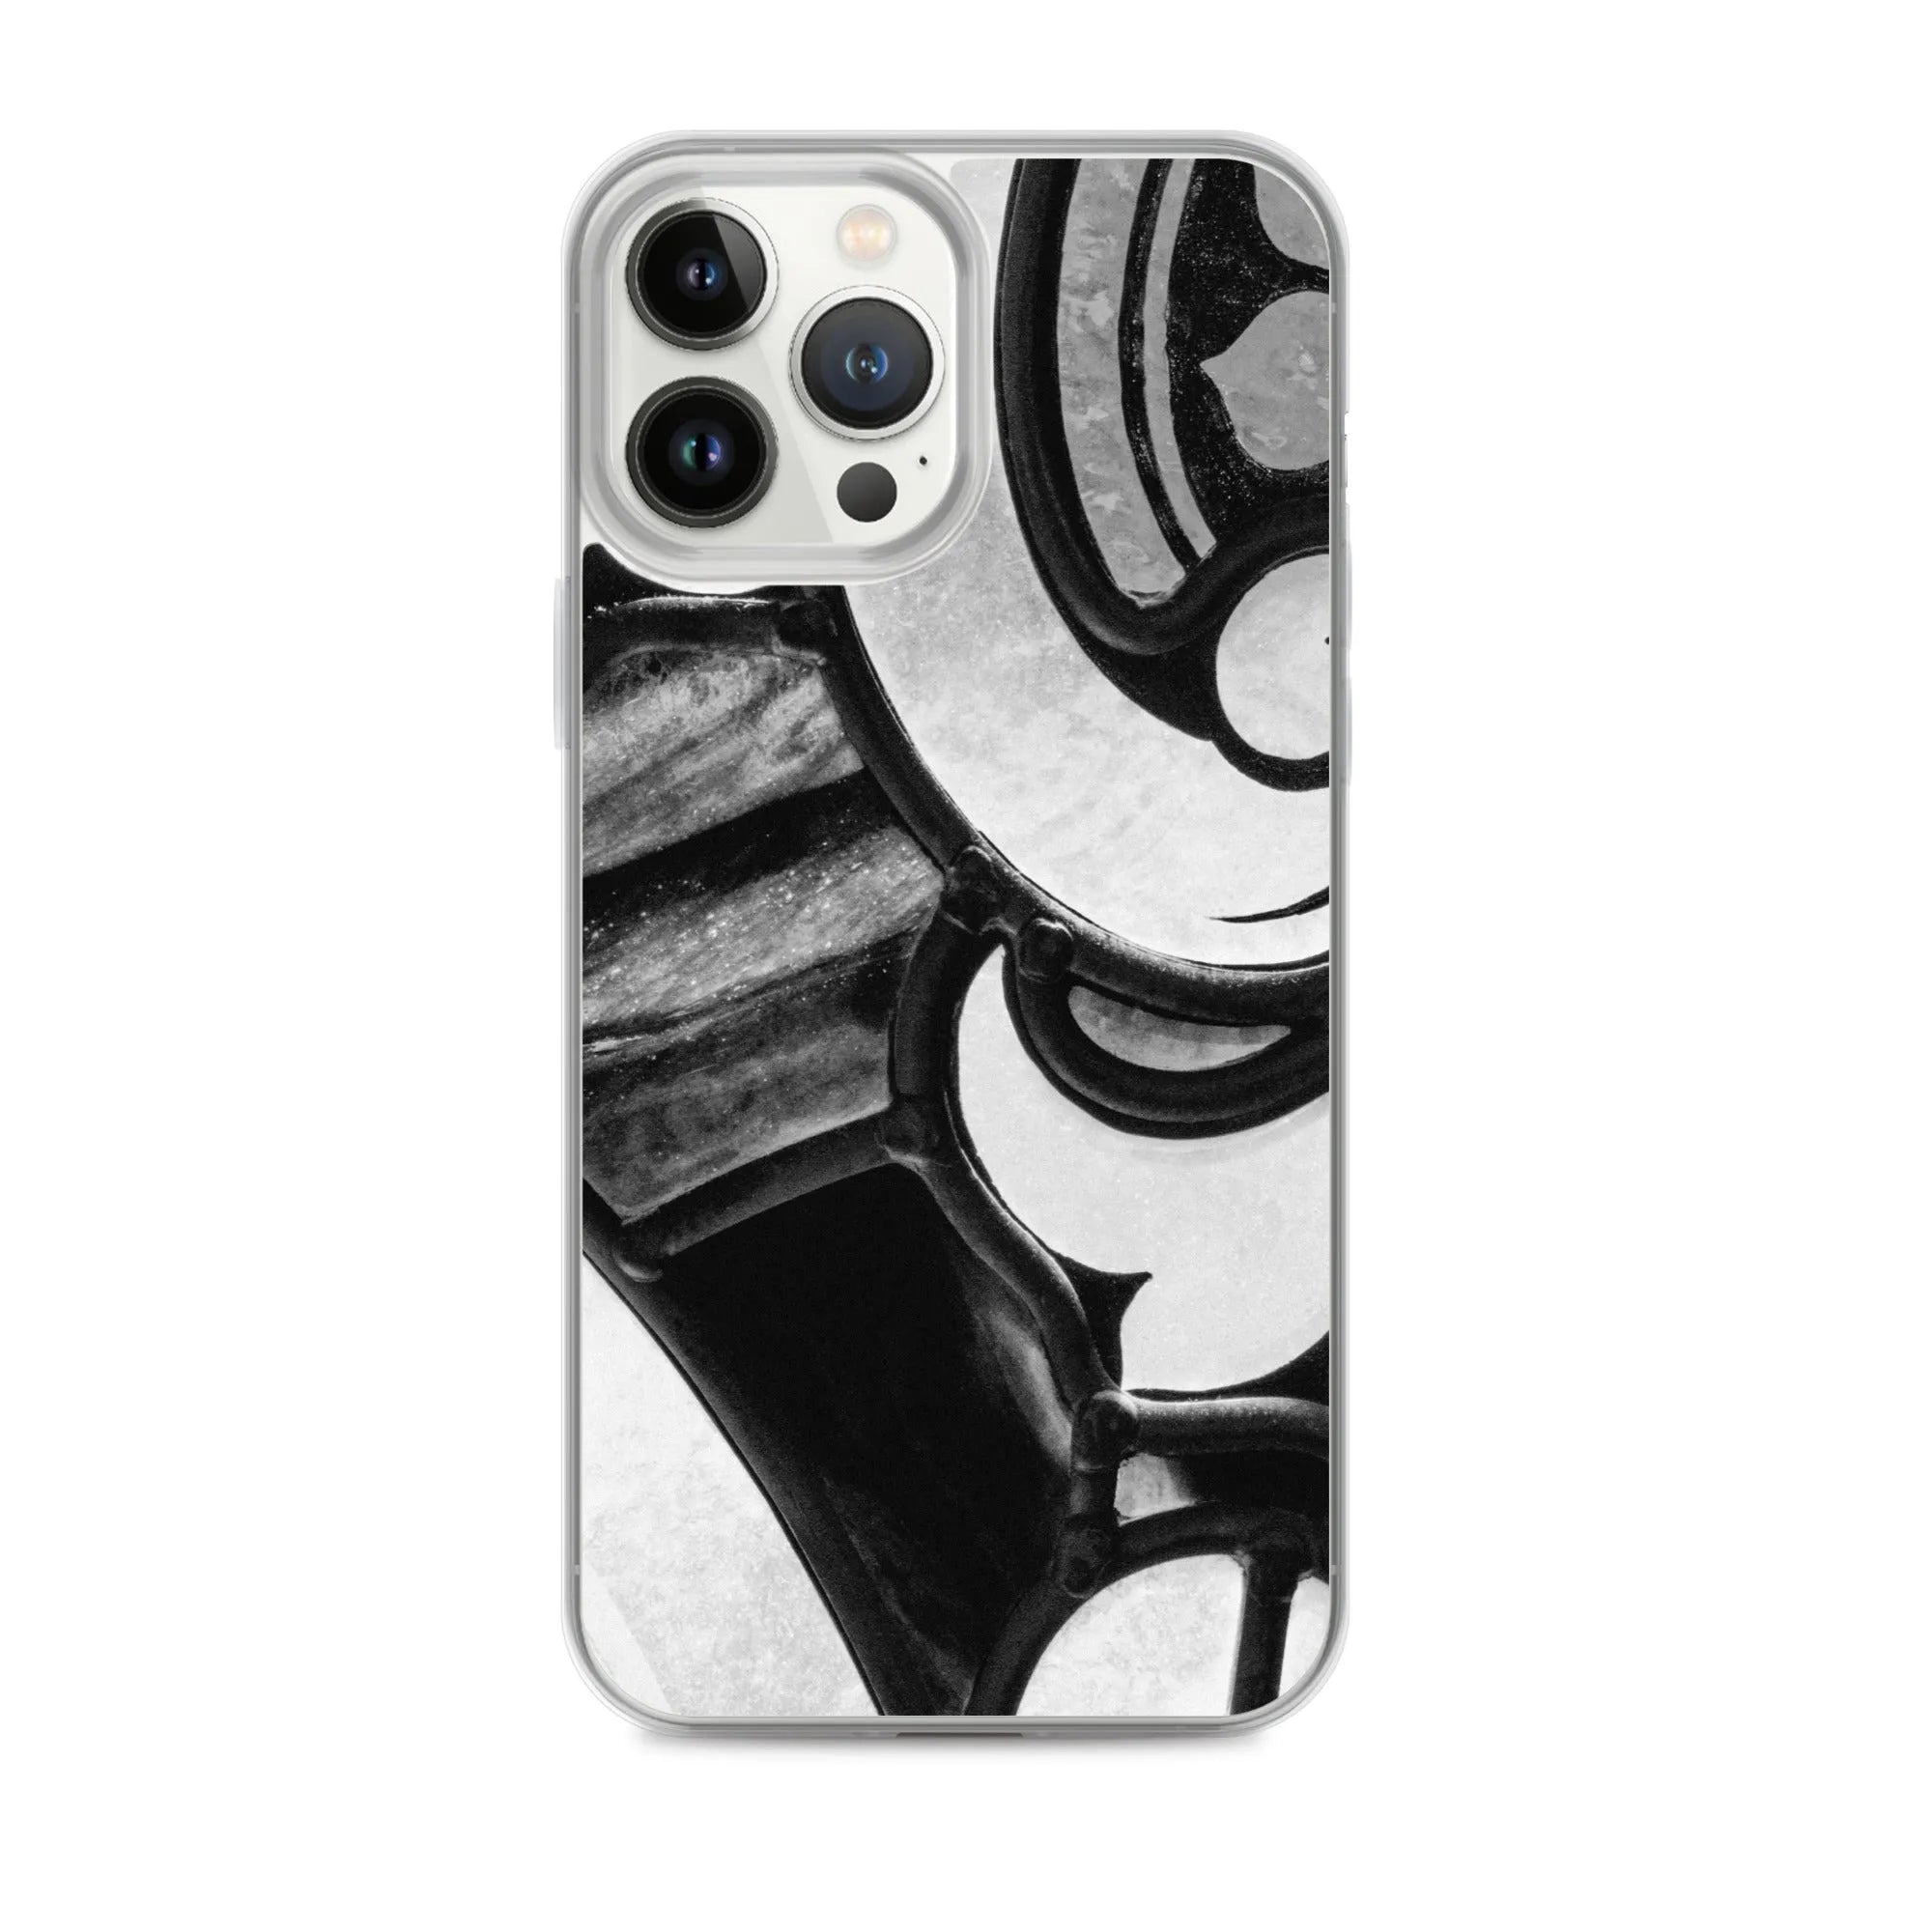 Stay Glassy - Designer Travels Art Iphone Case - Black And White - Iphone 13 Pro Max - Mobile Phone Cases - Aesthetic